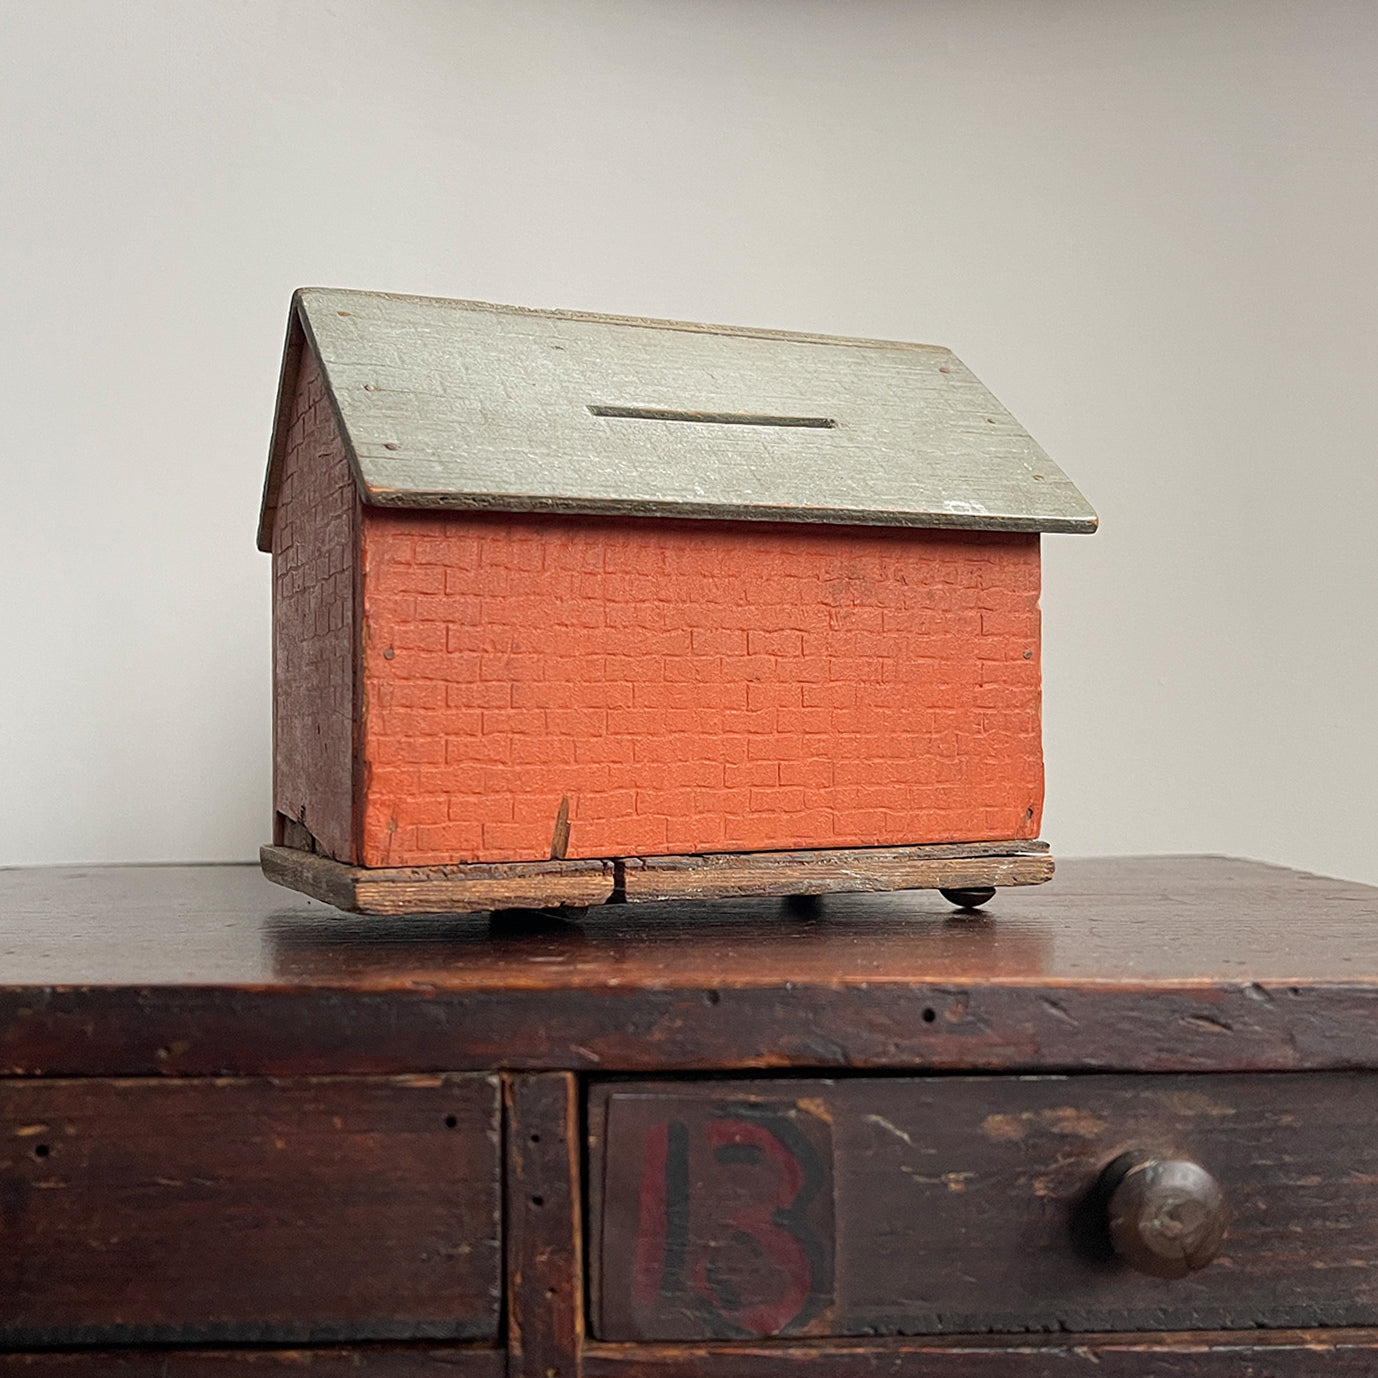 A delightful little naively scratch built Wooden Money Box - SHOP NOW - www.intovintage.co.uk